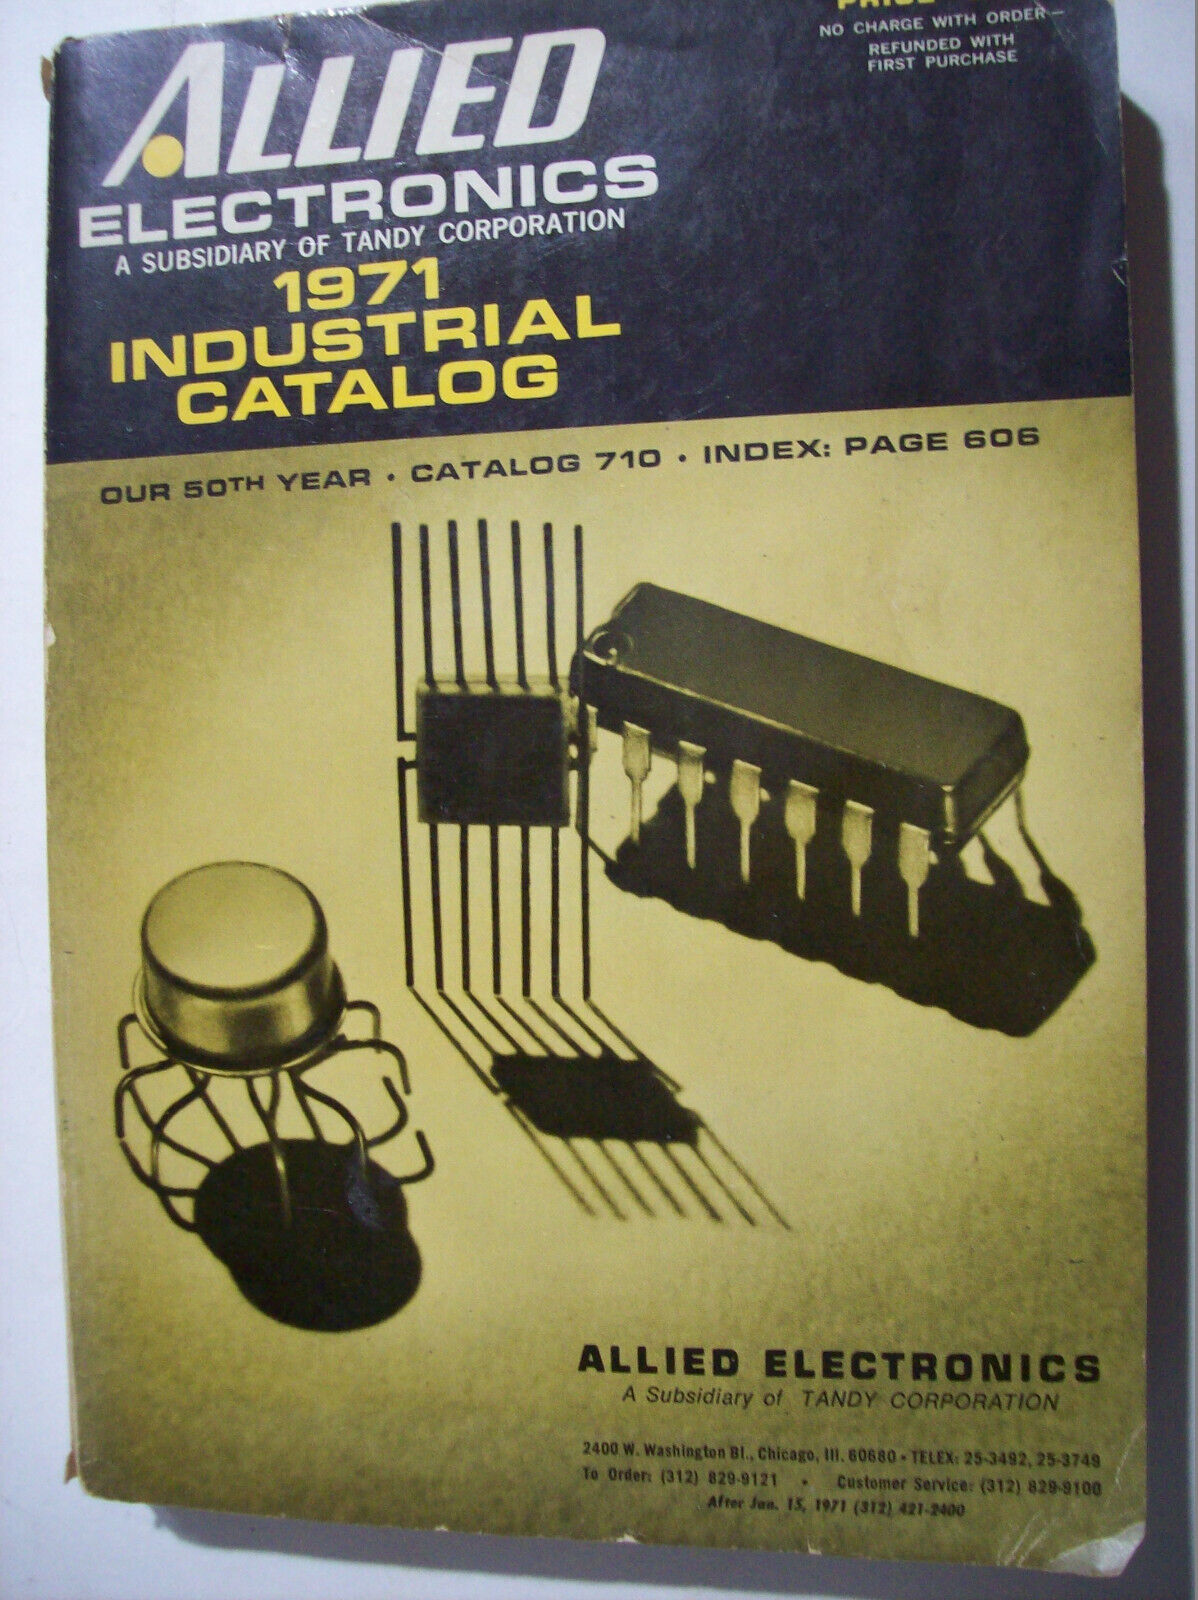 Vintage ALLIED ELECTRONICS 1971 INDUSTRIAL CATALOG 710, Tandy Corp, 614 Pages